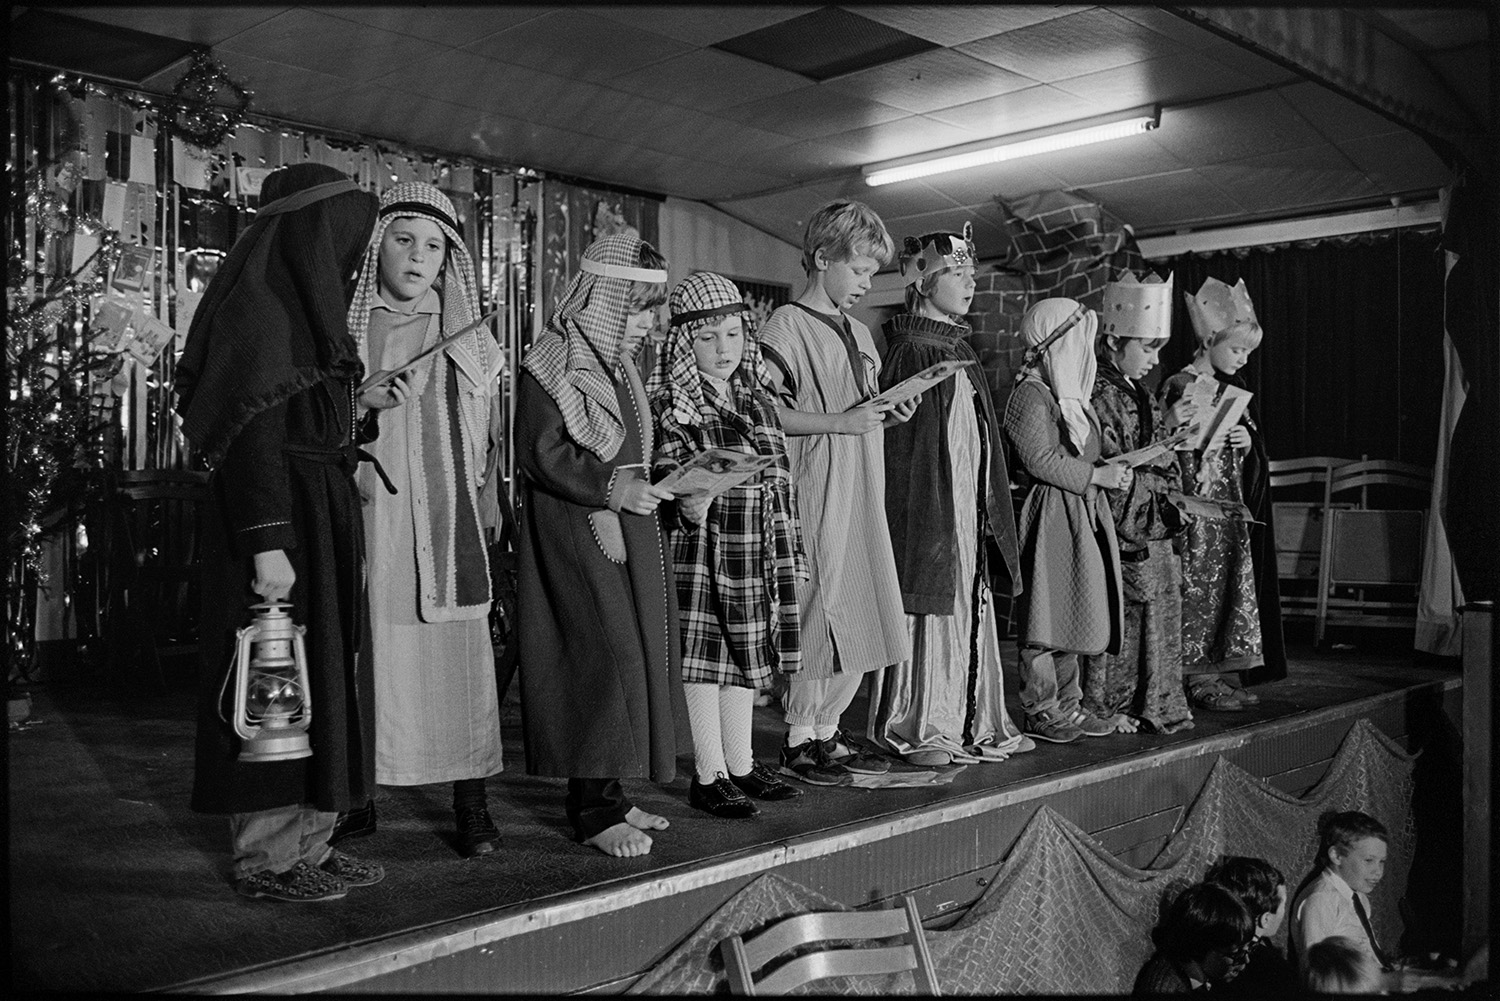 Christmas show in village hall Nativity play, children performing.
[Children singing in a Christmas show on the stage in Dolton Village Hall, dressed as shepherds and kings in the nativity story.]